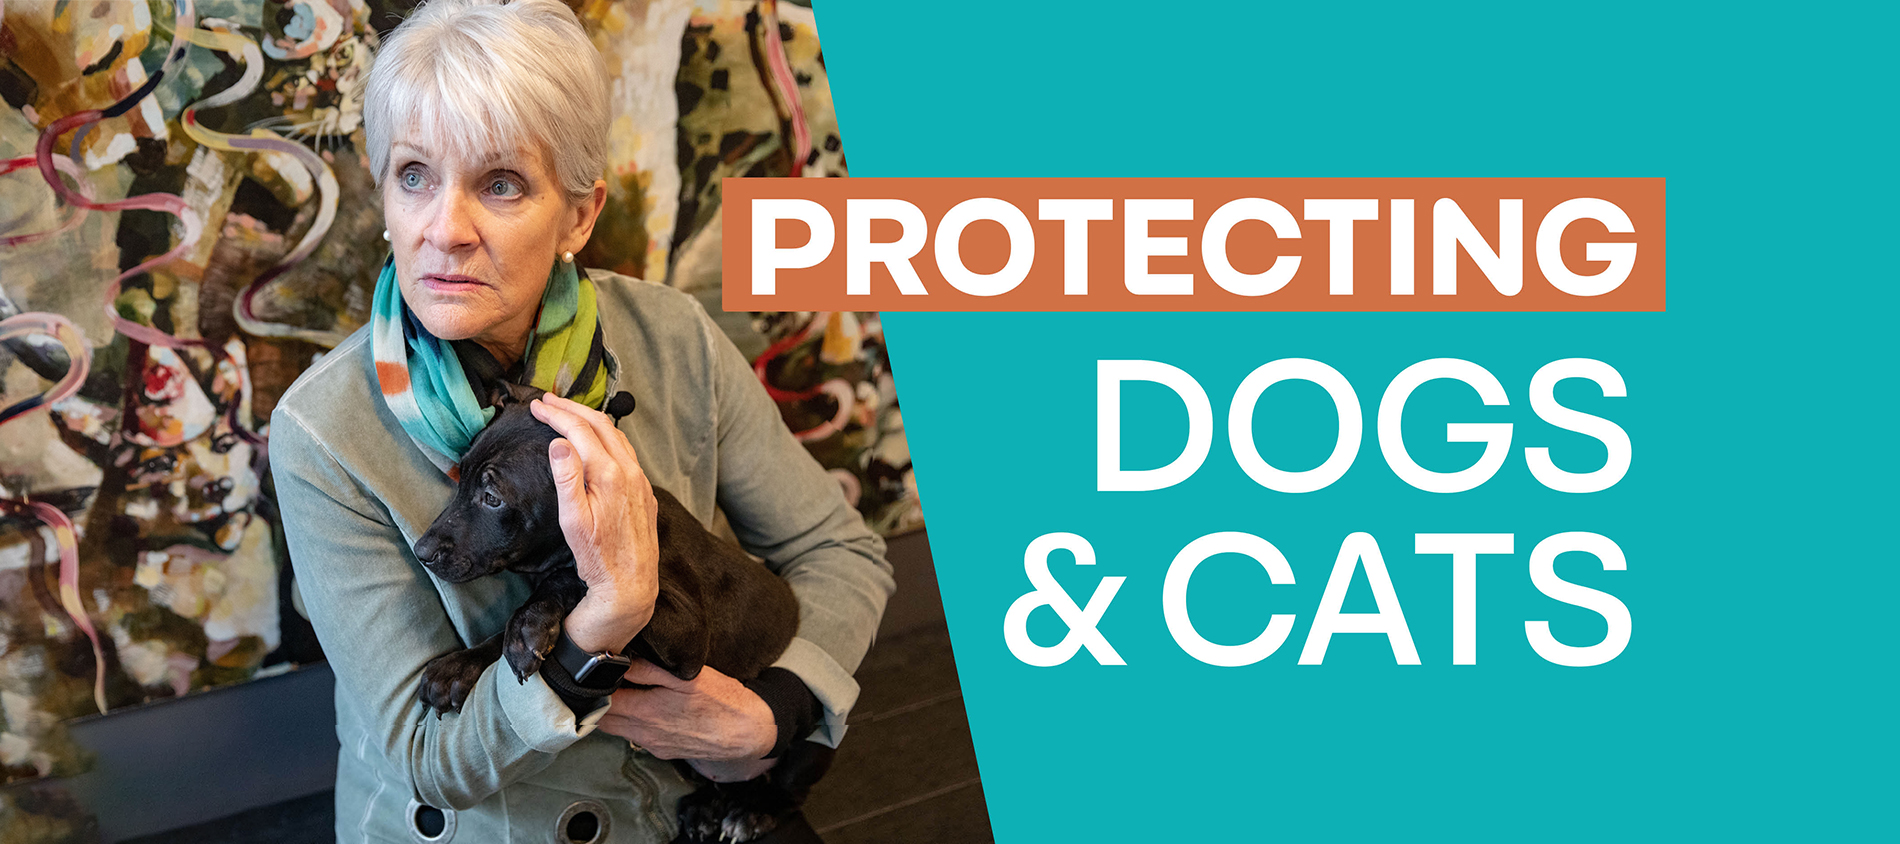 Protecting Dogs & Cats